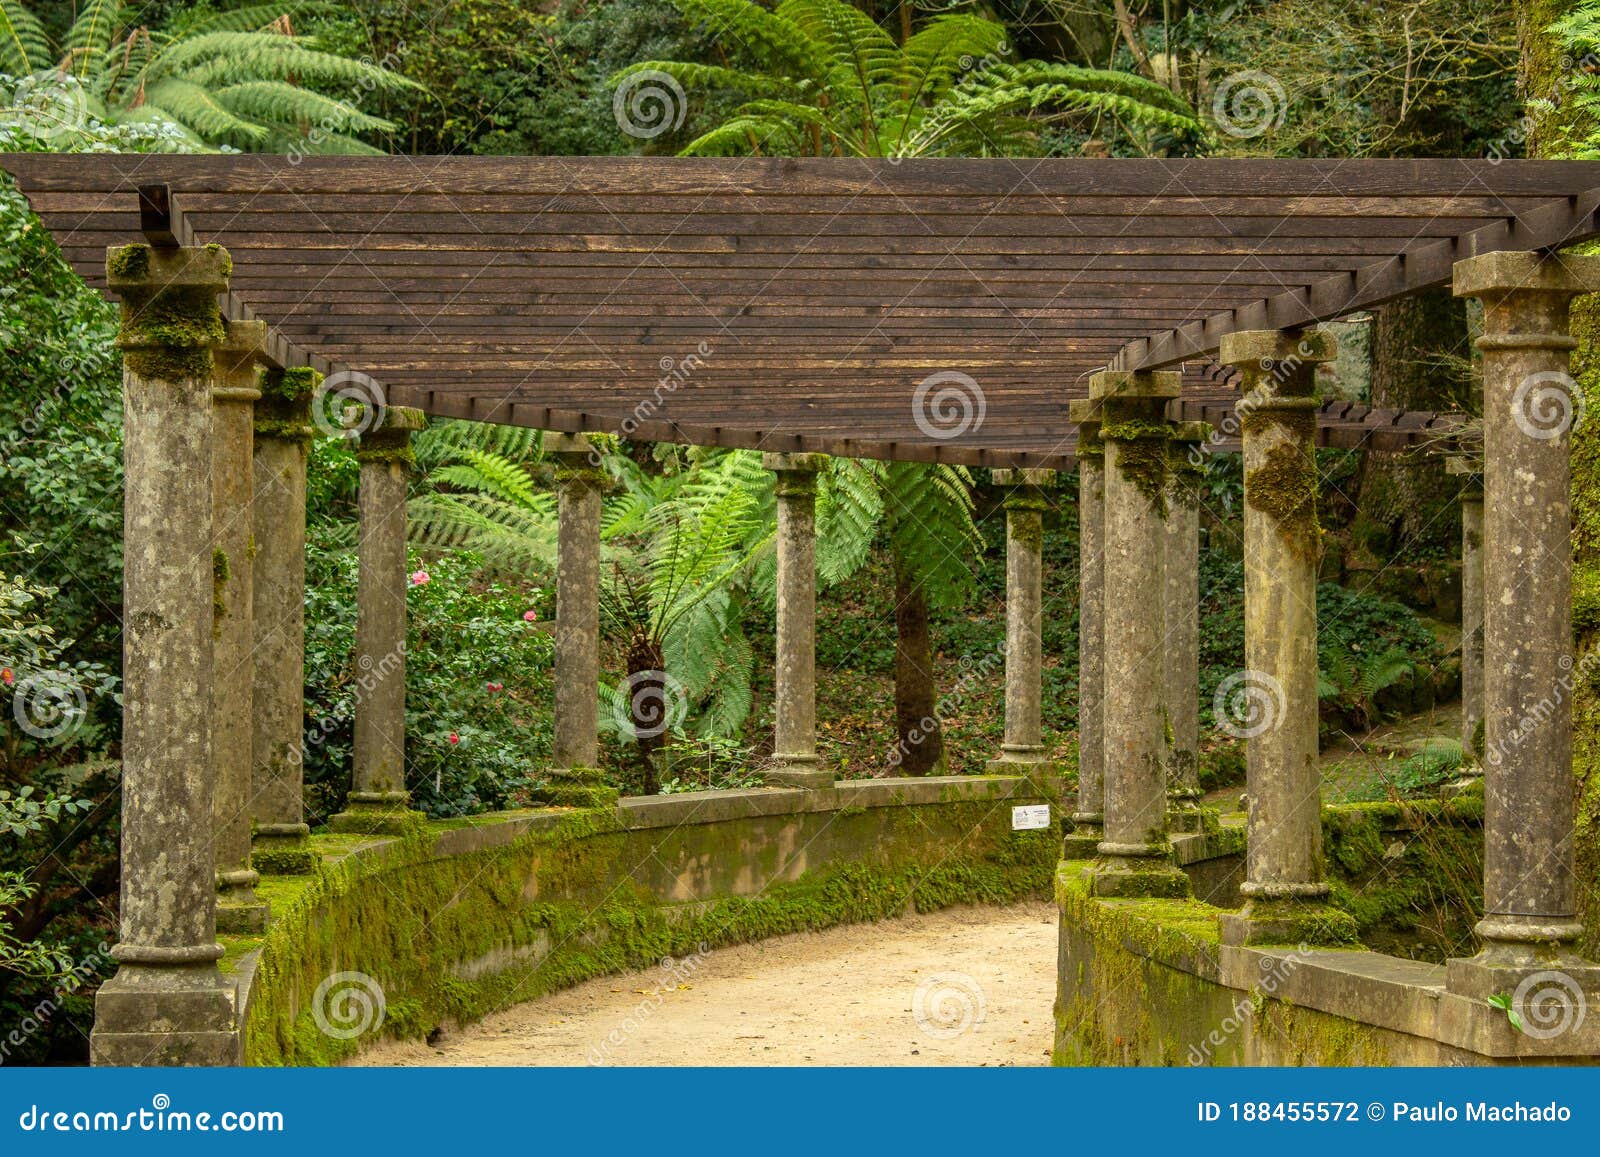 6 211 Gardens Landscaped Photos Free Royalty Free Stock Photos From Dreamstime